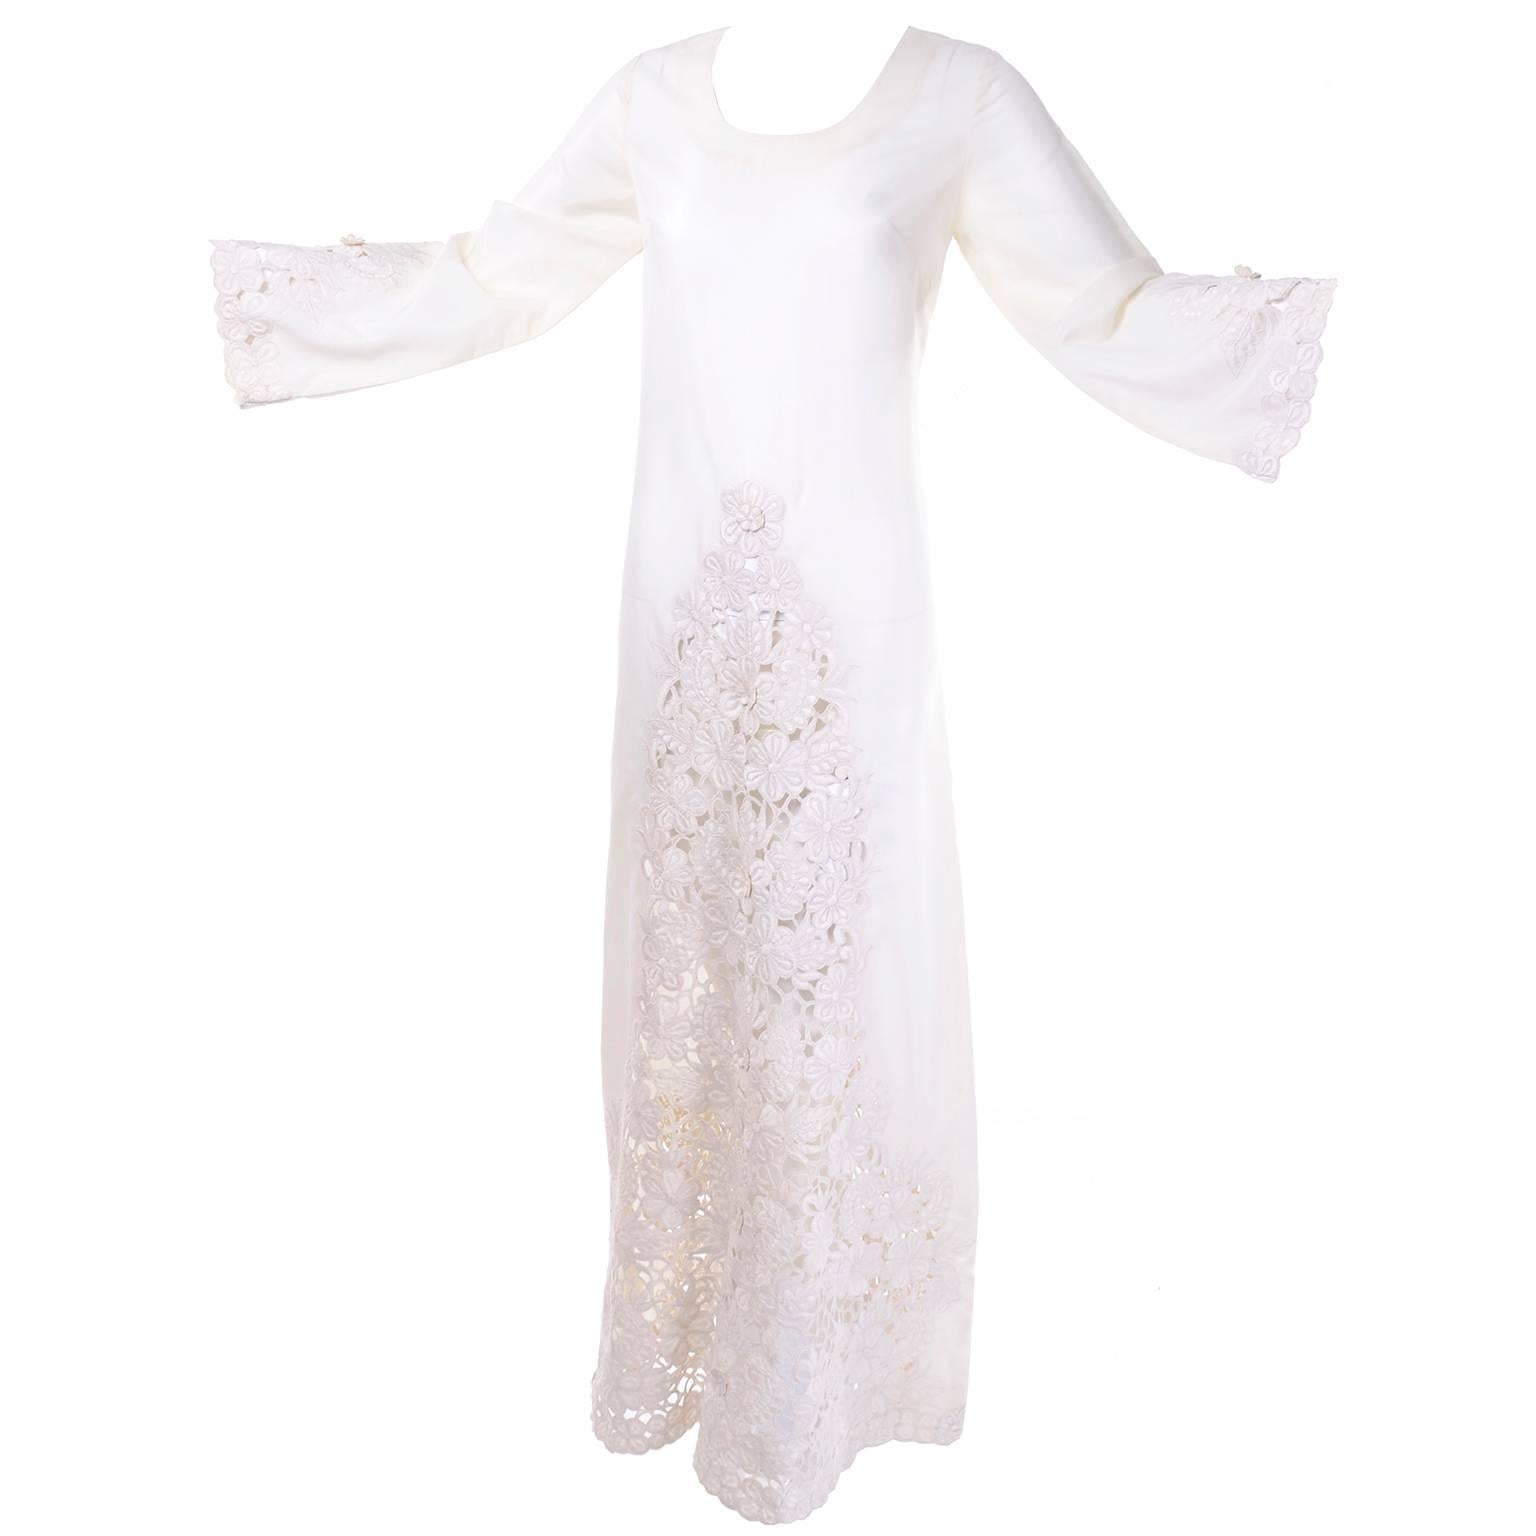 Shangri La Hotel Singapore Vintage Dress or Wedding Gown With Guipure Lace 1